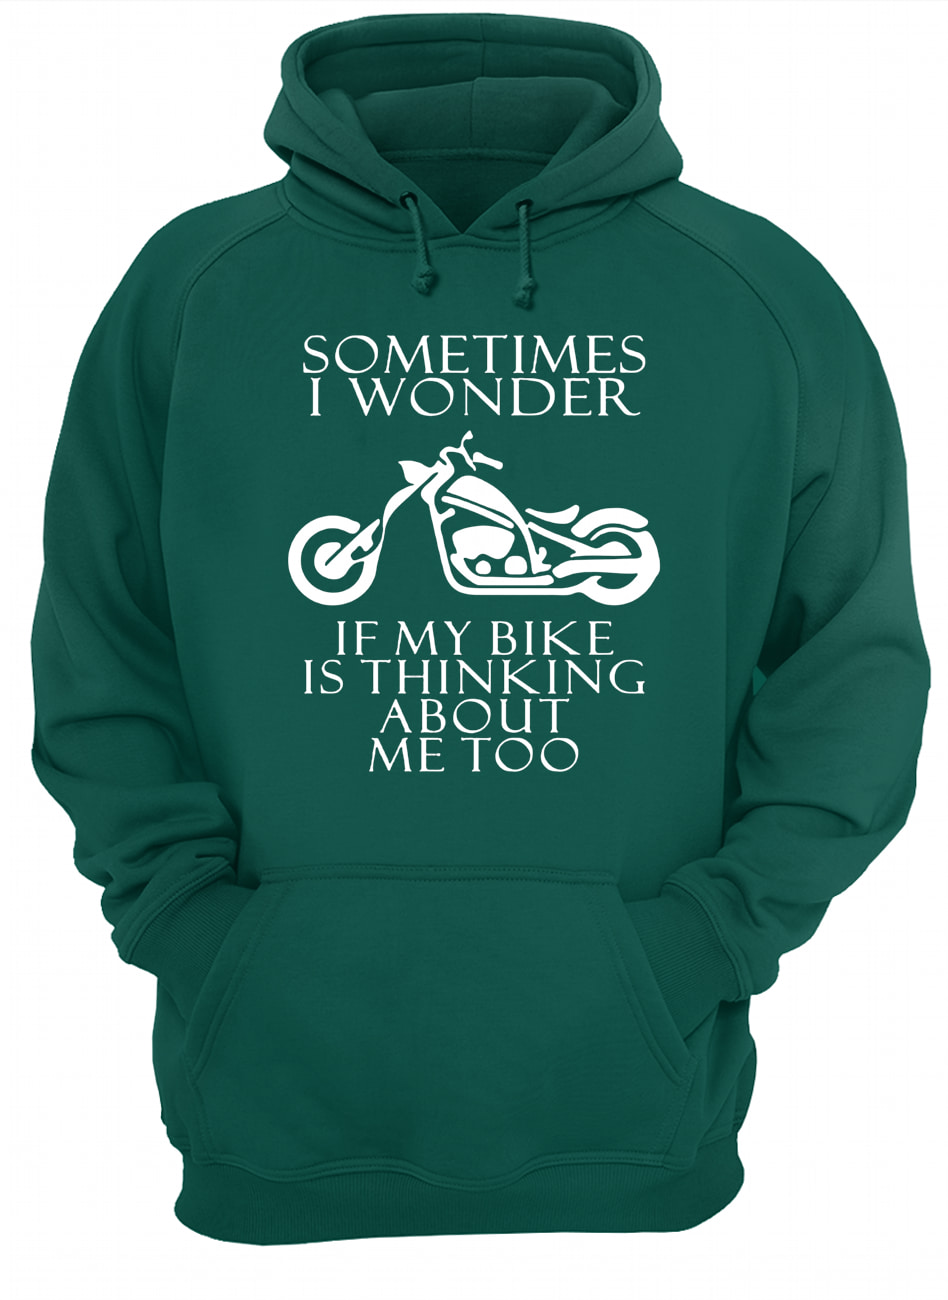 Sometimes i wonder if my bike is thinking about me too hoodie